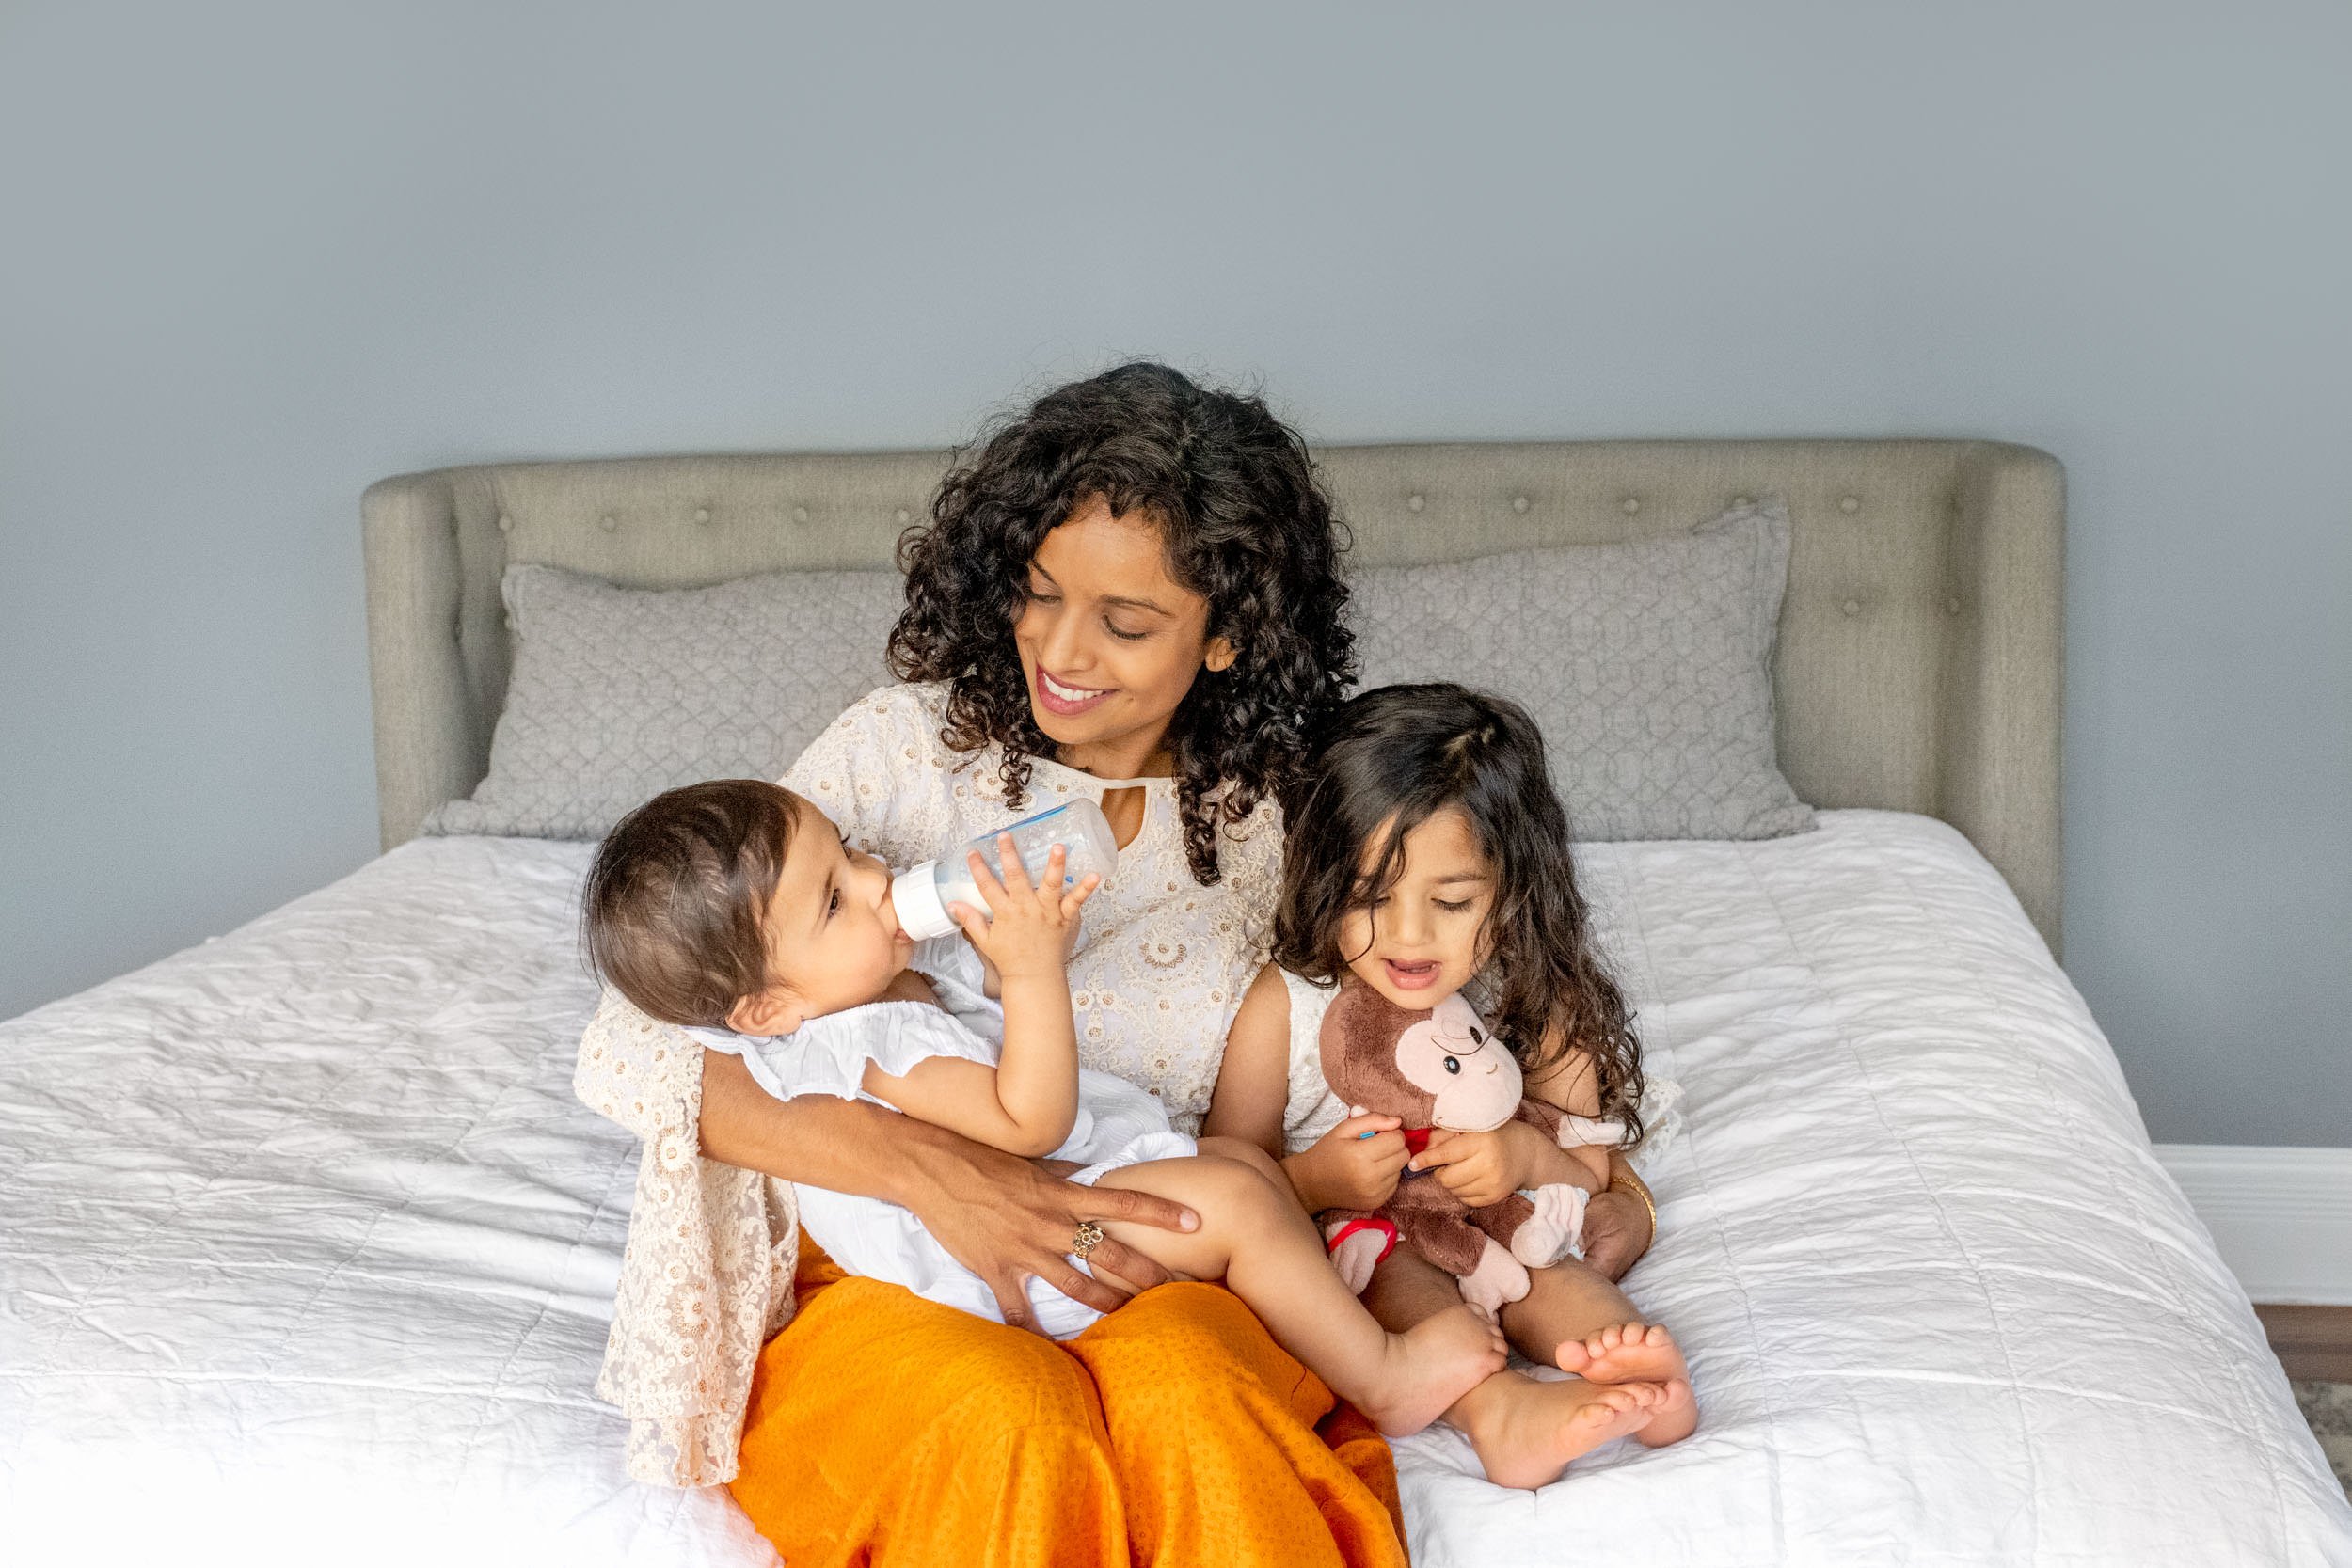  Mom cuddling with her beautiful daughters while one drinks a bottle on her bed in their New Jersey home. #nicolehawkinsfamilies #nicolehawkinsphotography #njfamilyphotographer #newjerseyphotographers #familyportraits #inhomephotographysession 